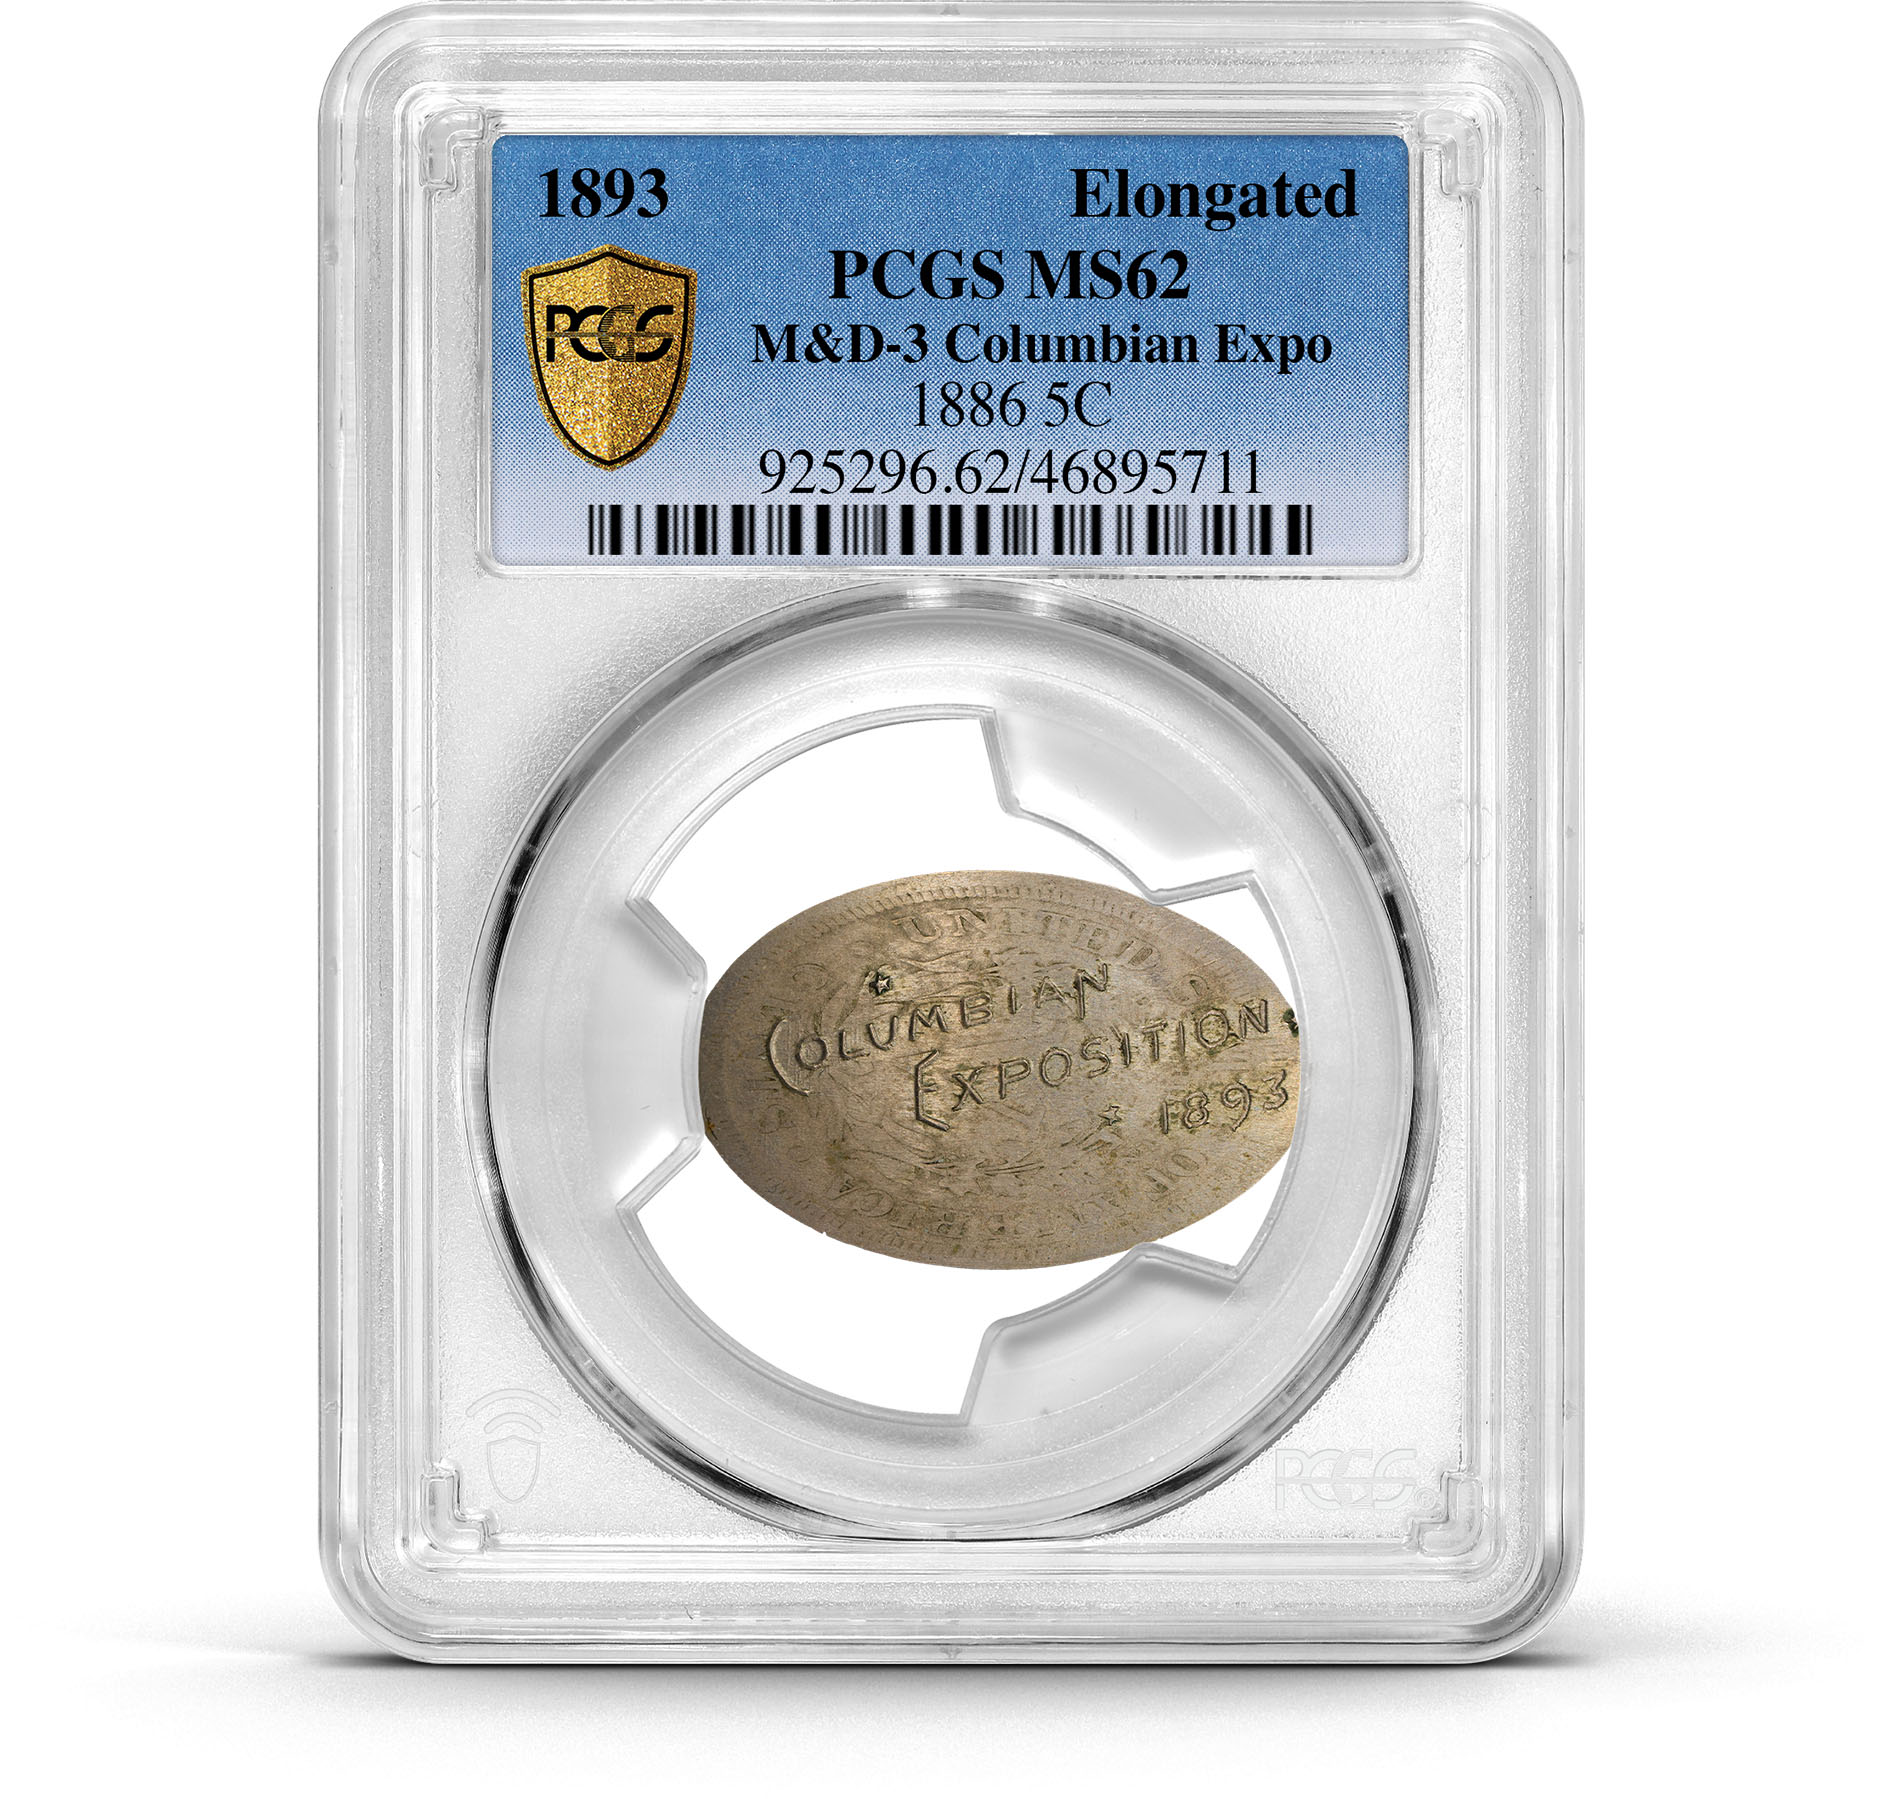 PCGS Unveils Grading of Classic Elongated Coins